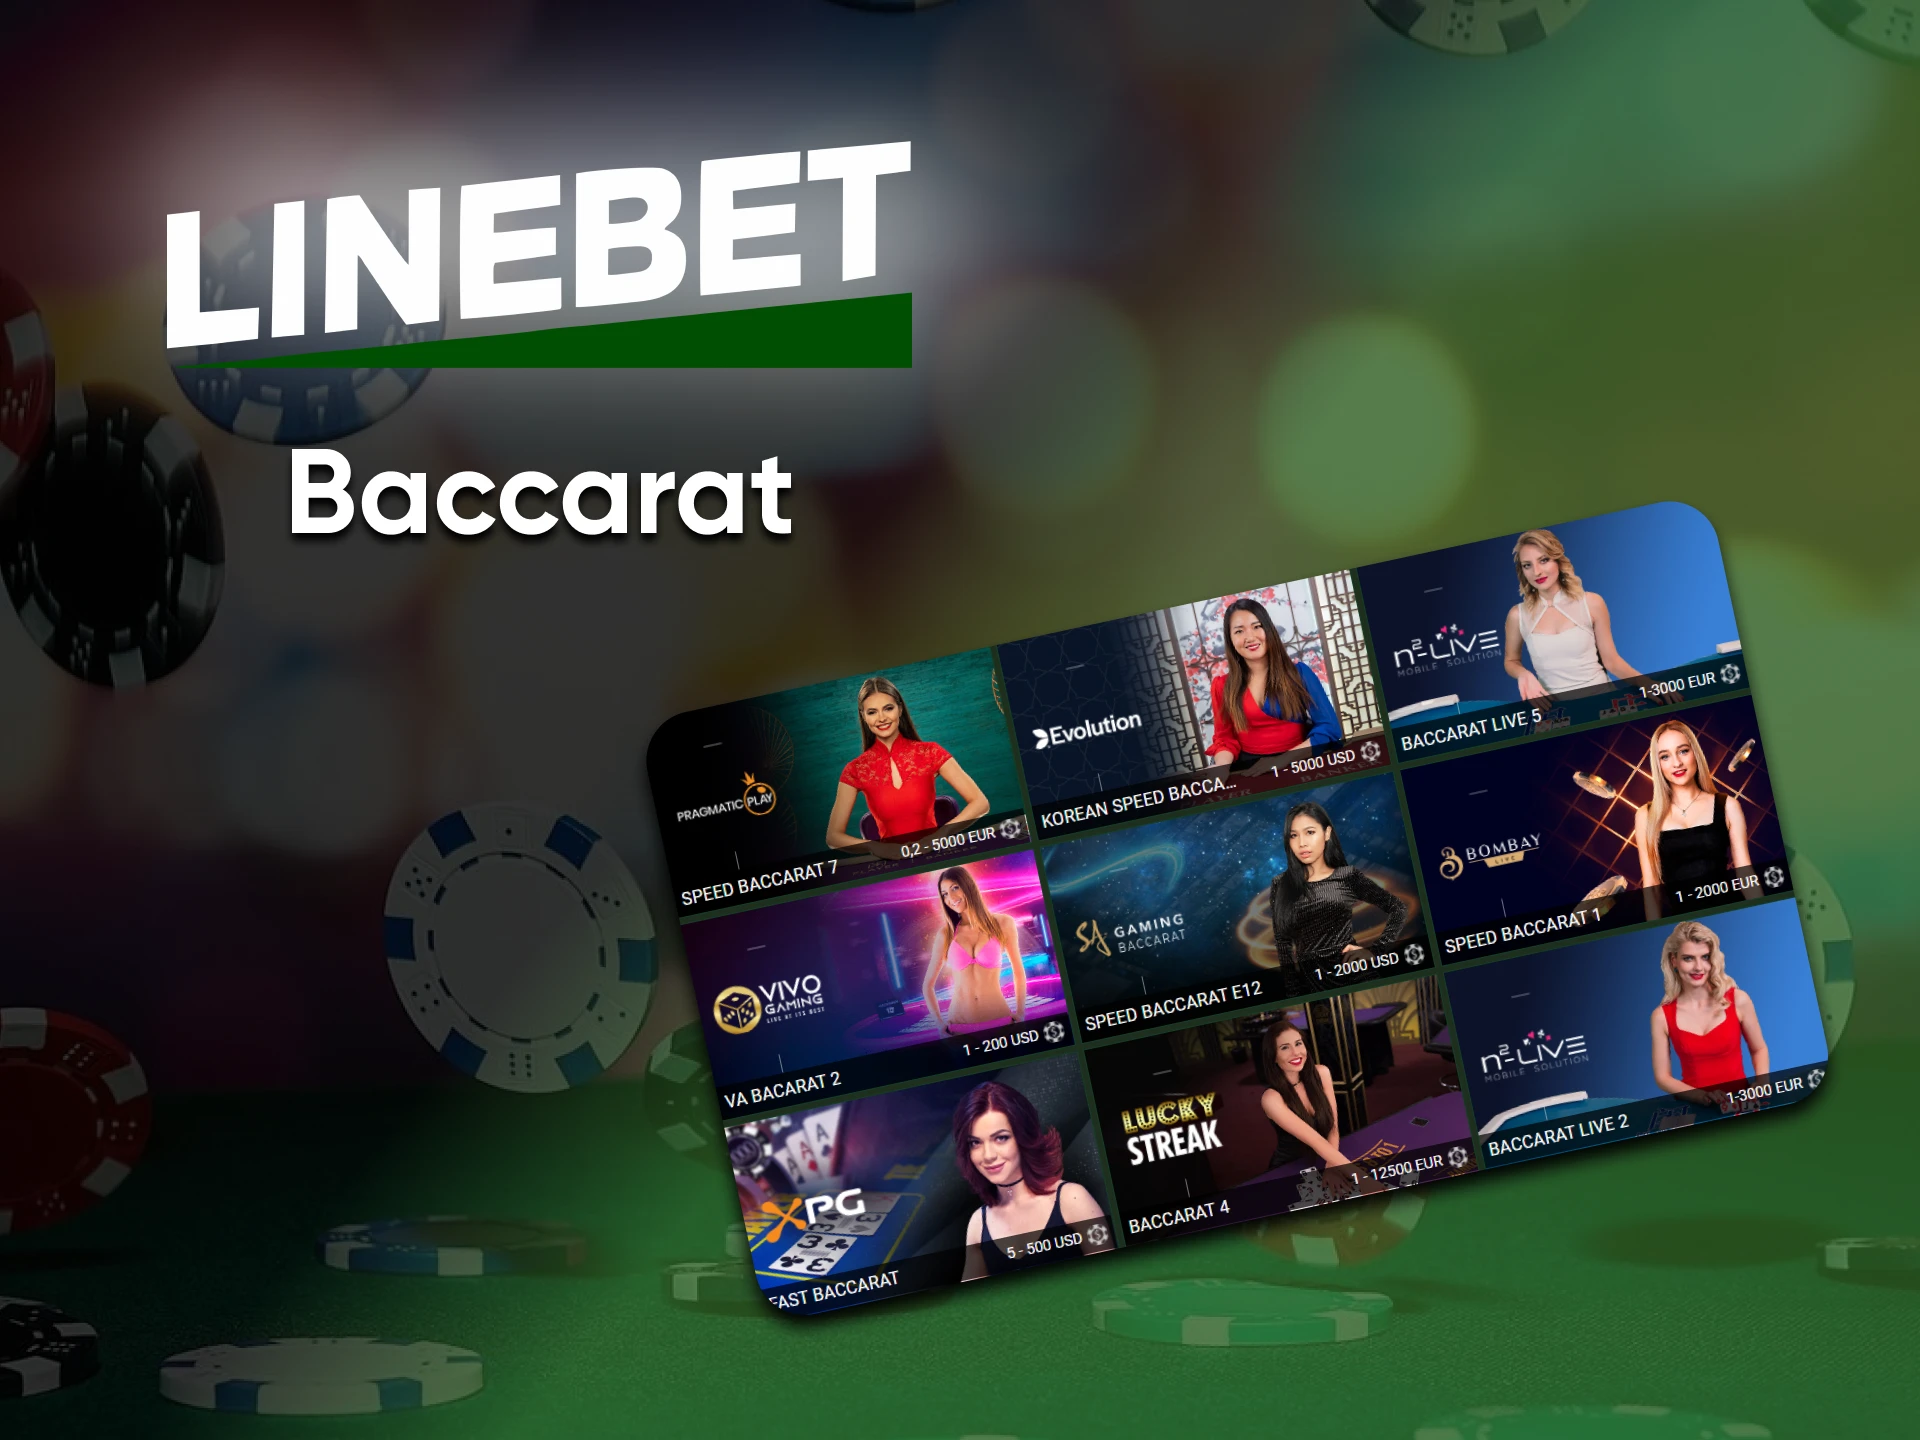 At Linebet casino you can play Baccarat.